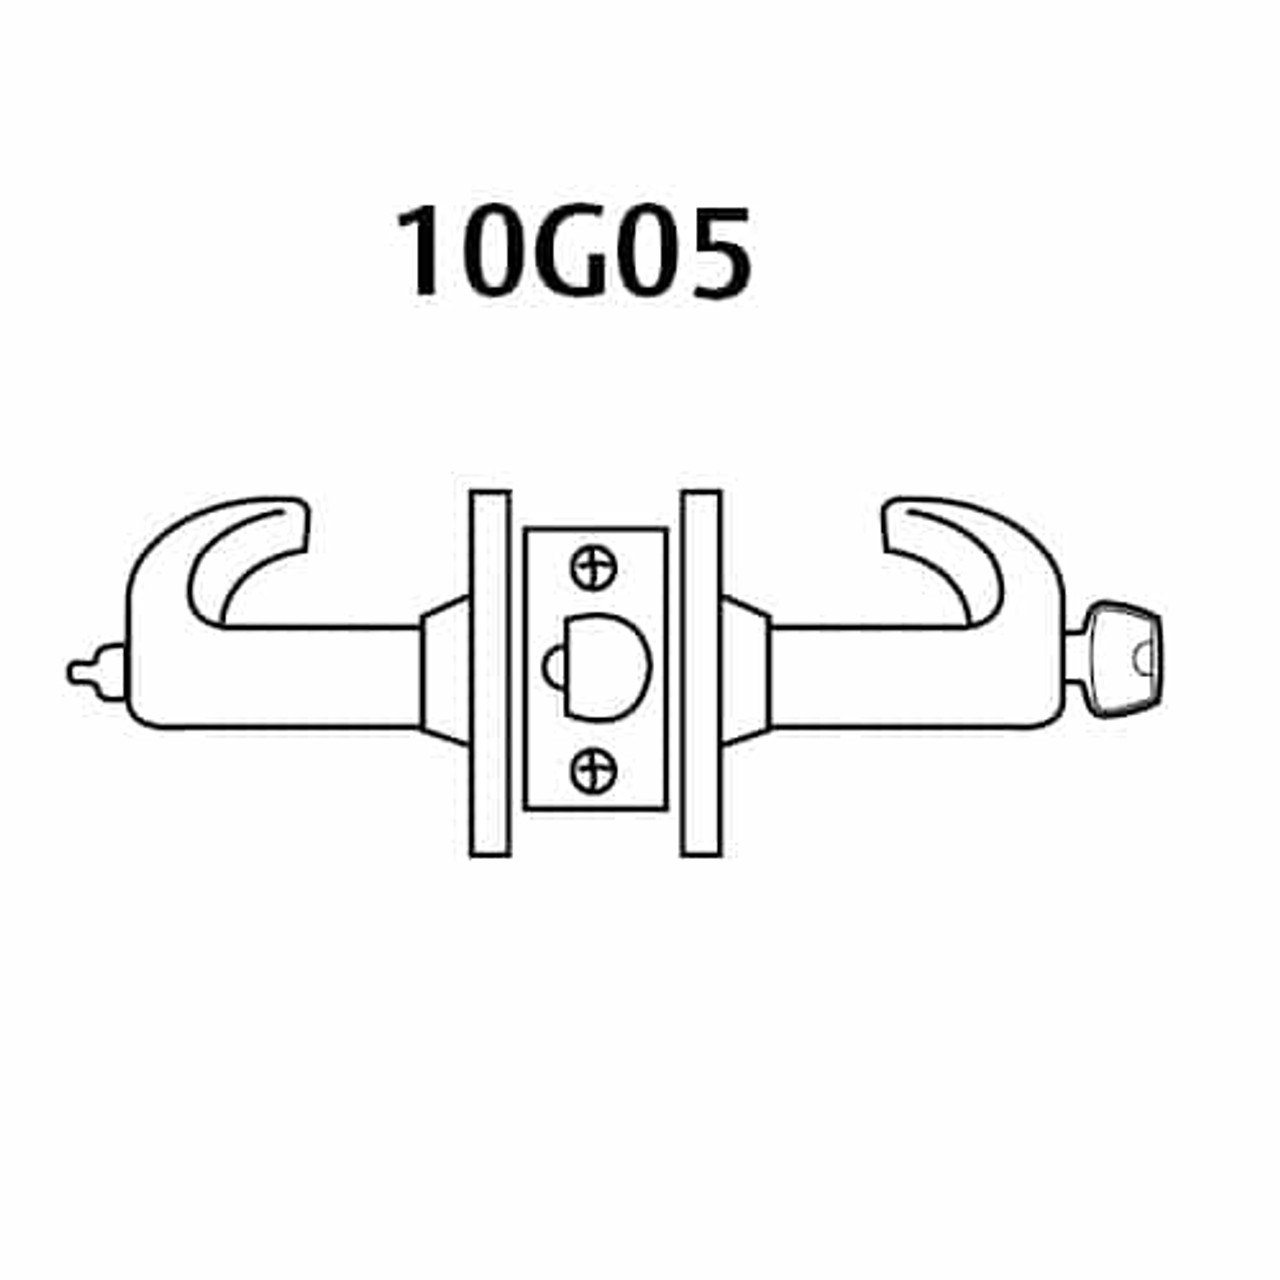 2870-10G05-GL-10B Sargent 10 Line Cylindrical Entry/Office Locks with L Lever Design and G Rose Prepped for SFIC in Oxidized Dull Bronze